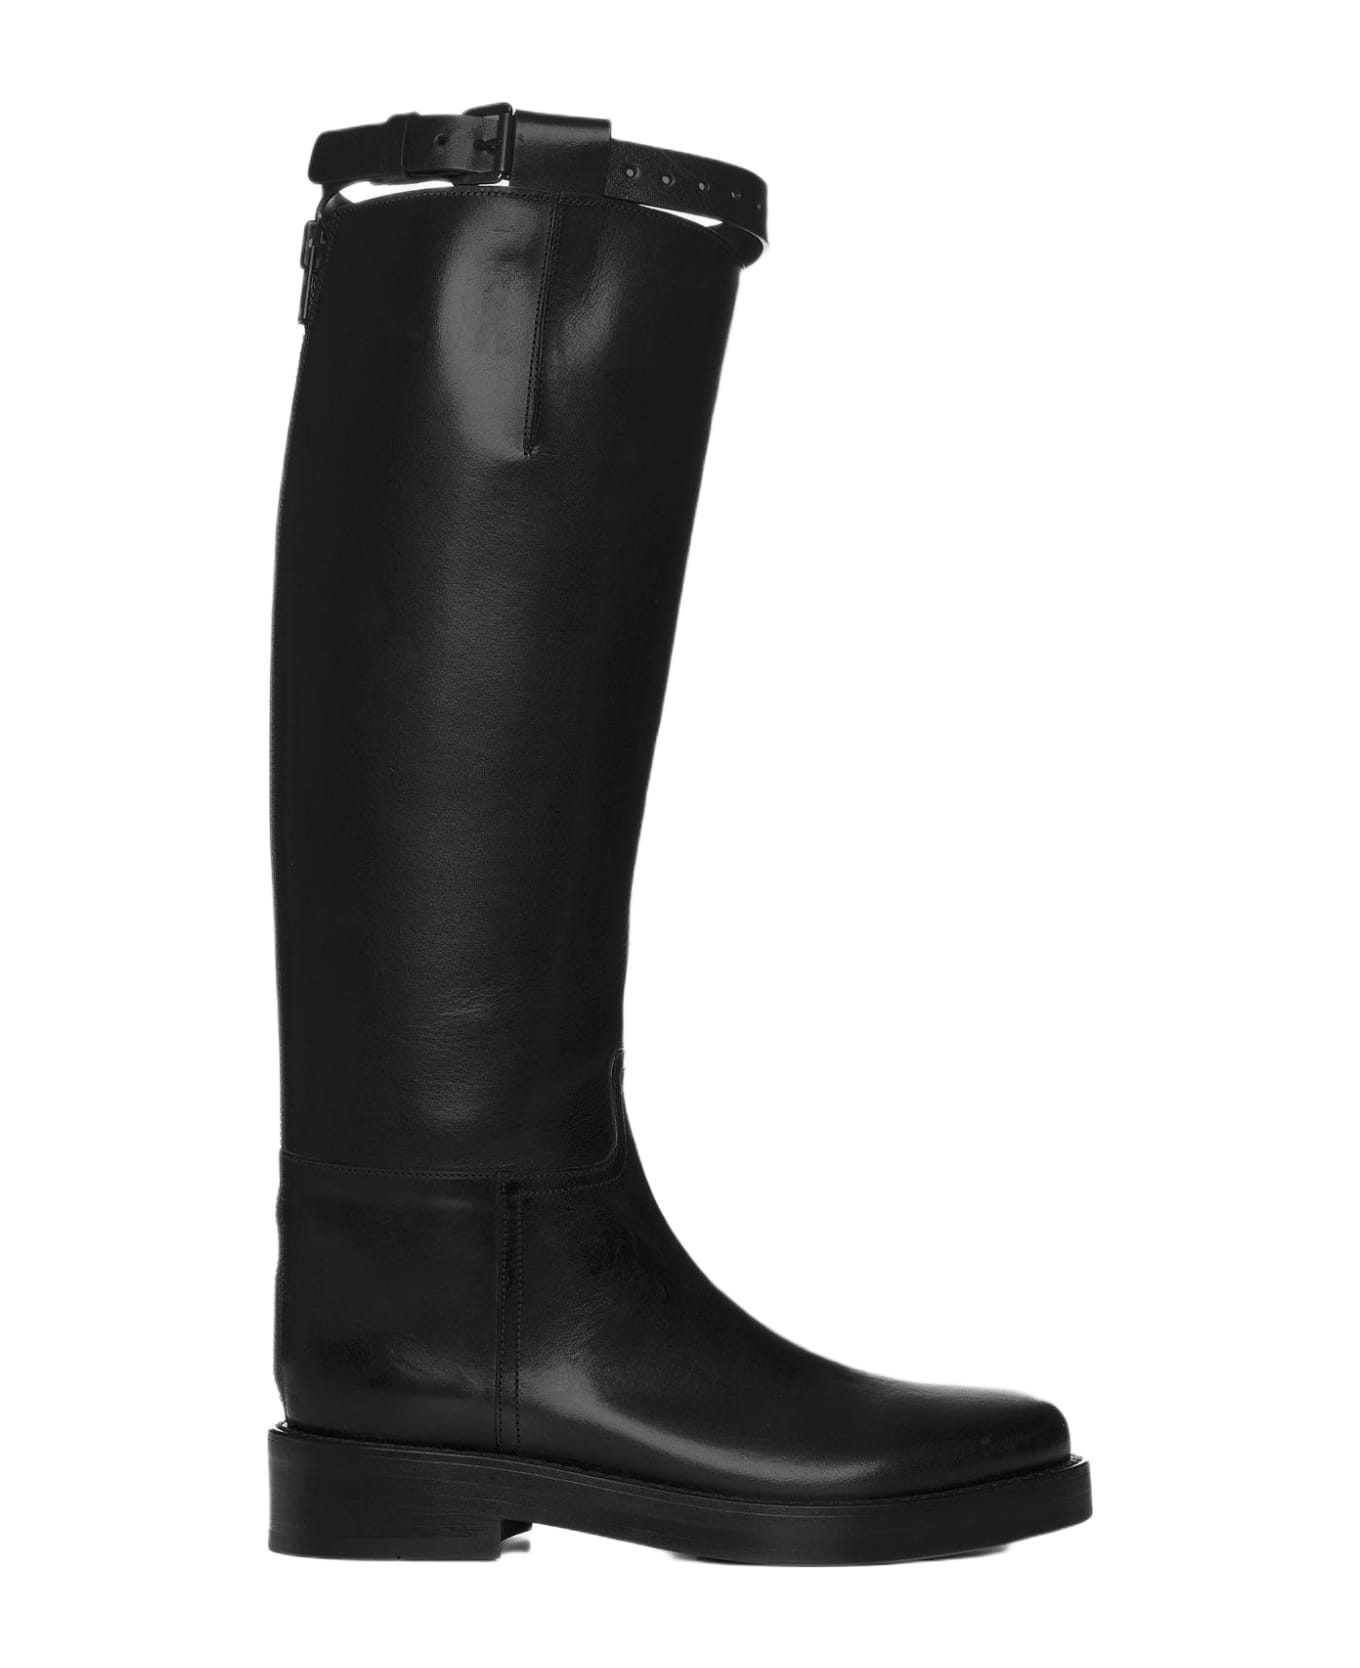 Ann Demeulemeester Stan Riding Leather Boots - Nero ブーツ